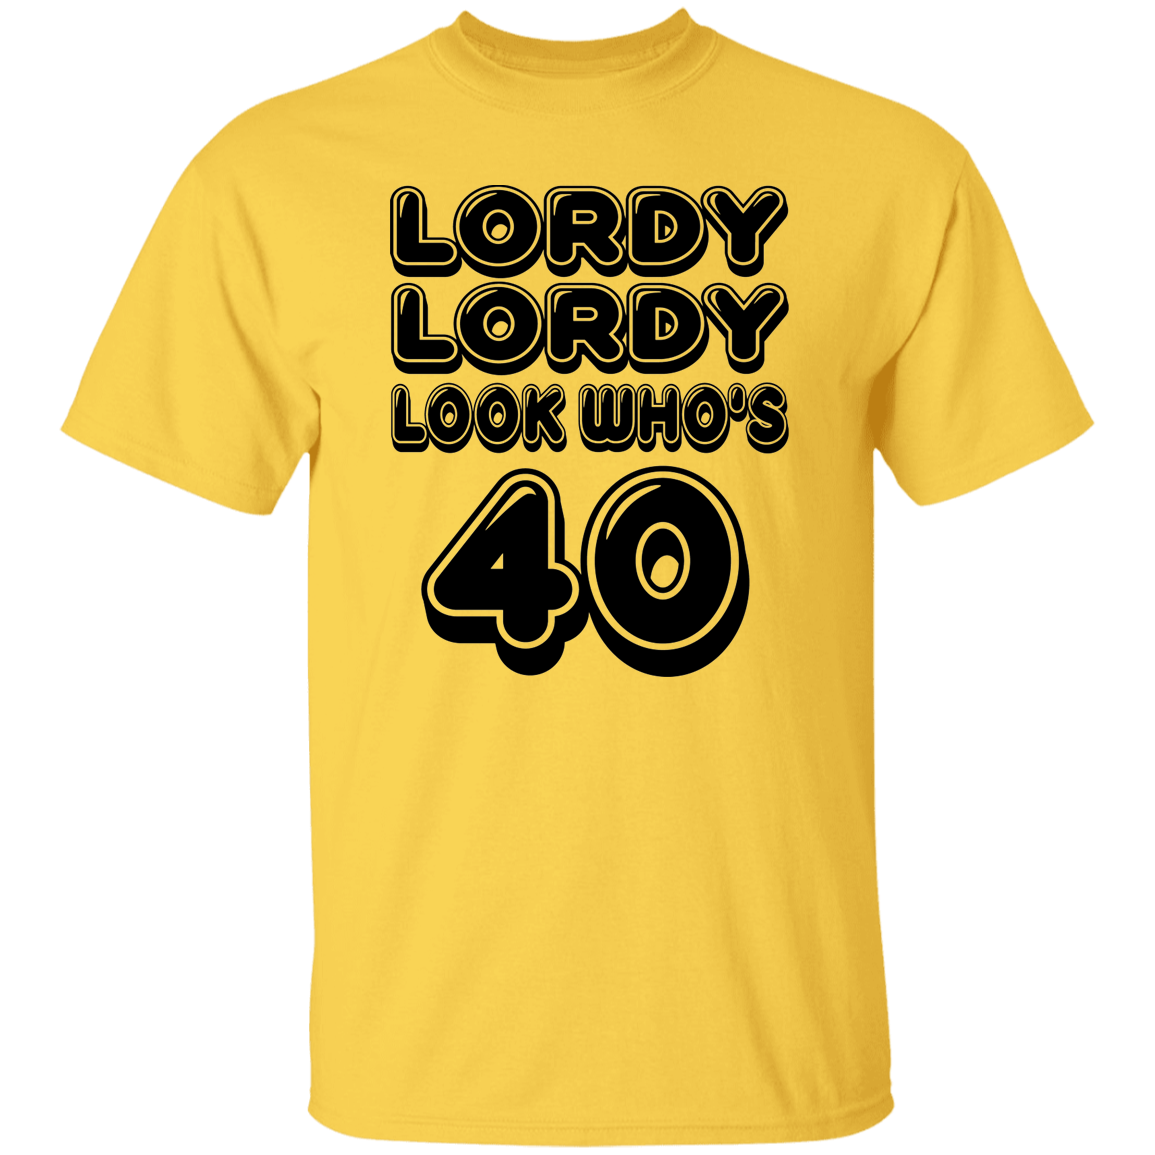 Lordy Lordy Look Who's 40 Black Print T-Shirt